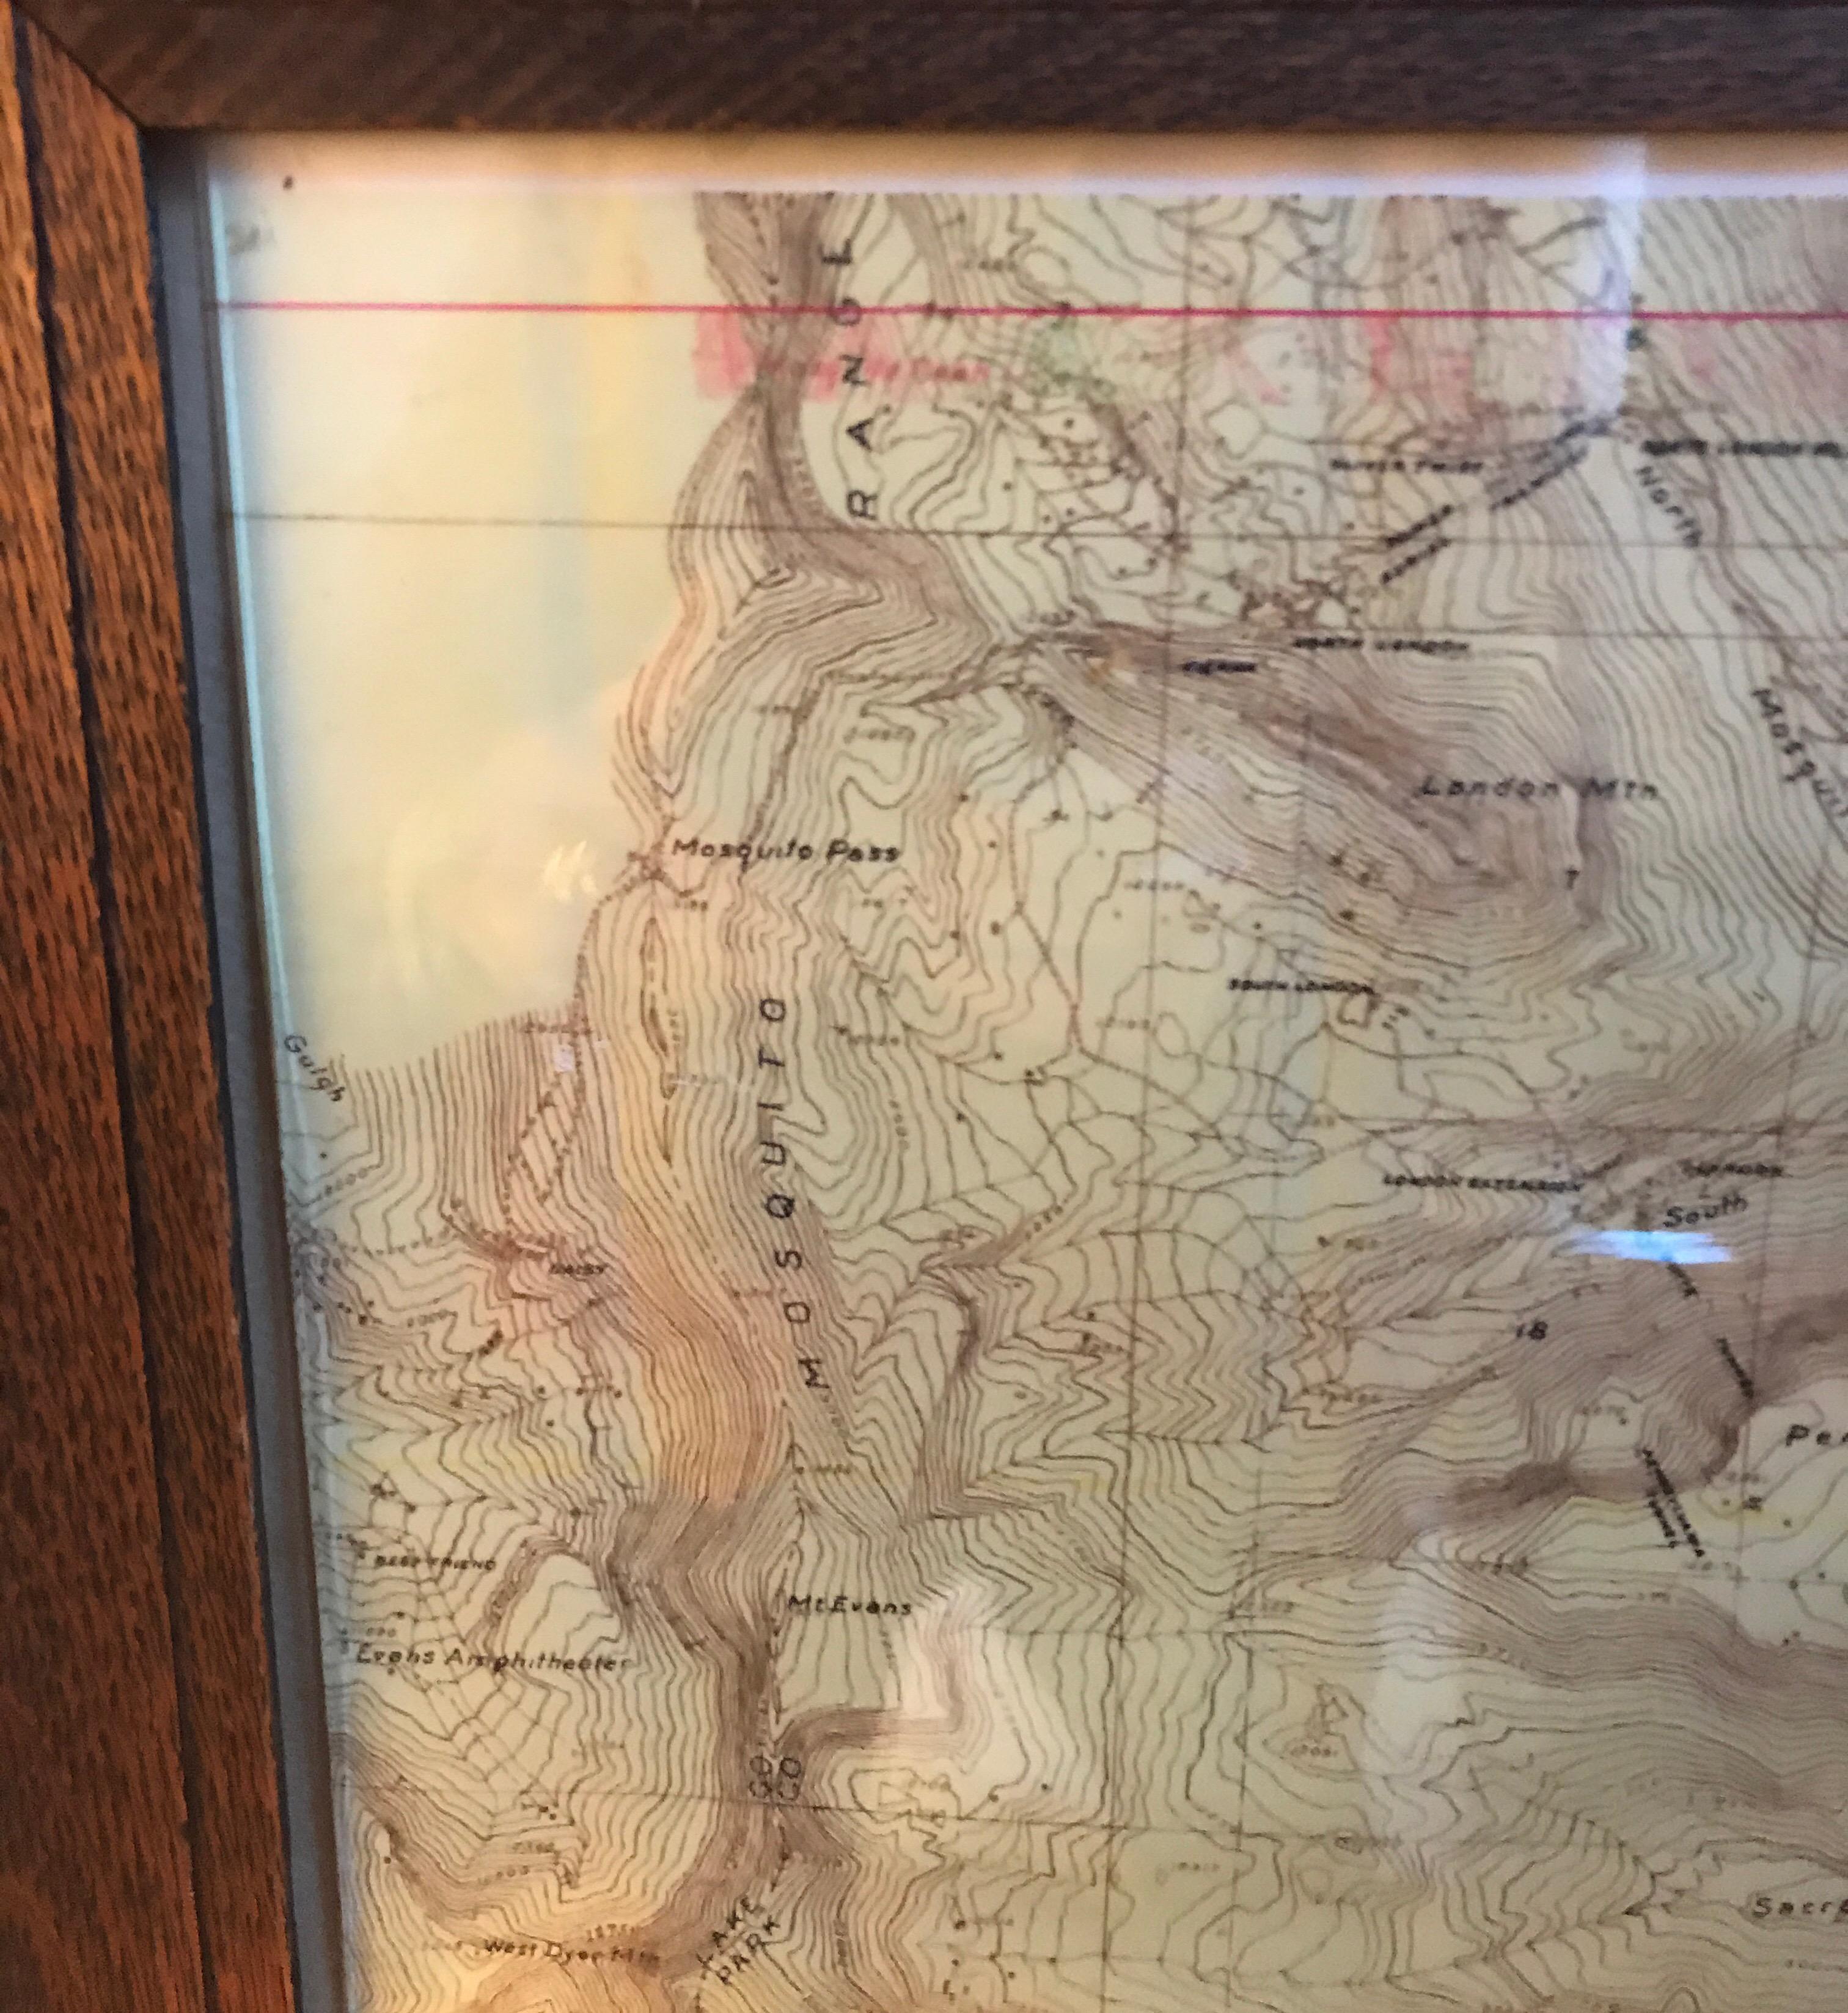 American Craftsman Topographical Map of the Pennsylvania Mountains in a Quarter Sawn Oak Frame For Sale